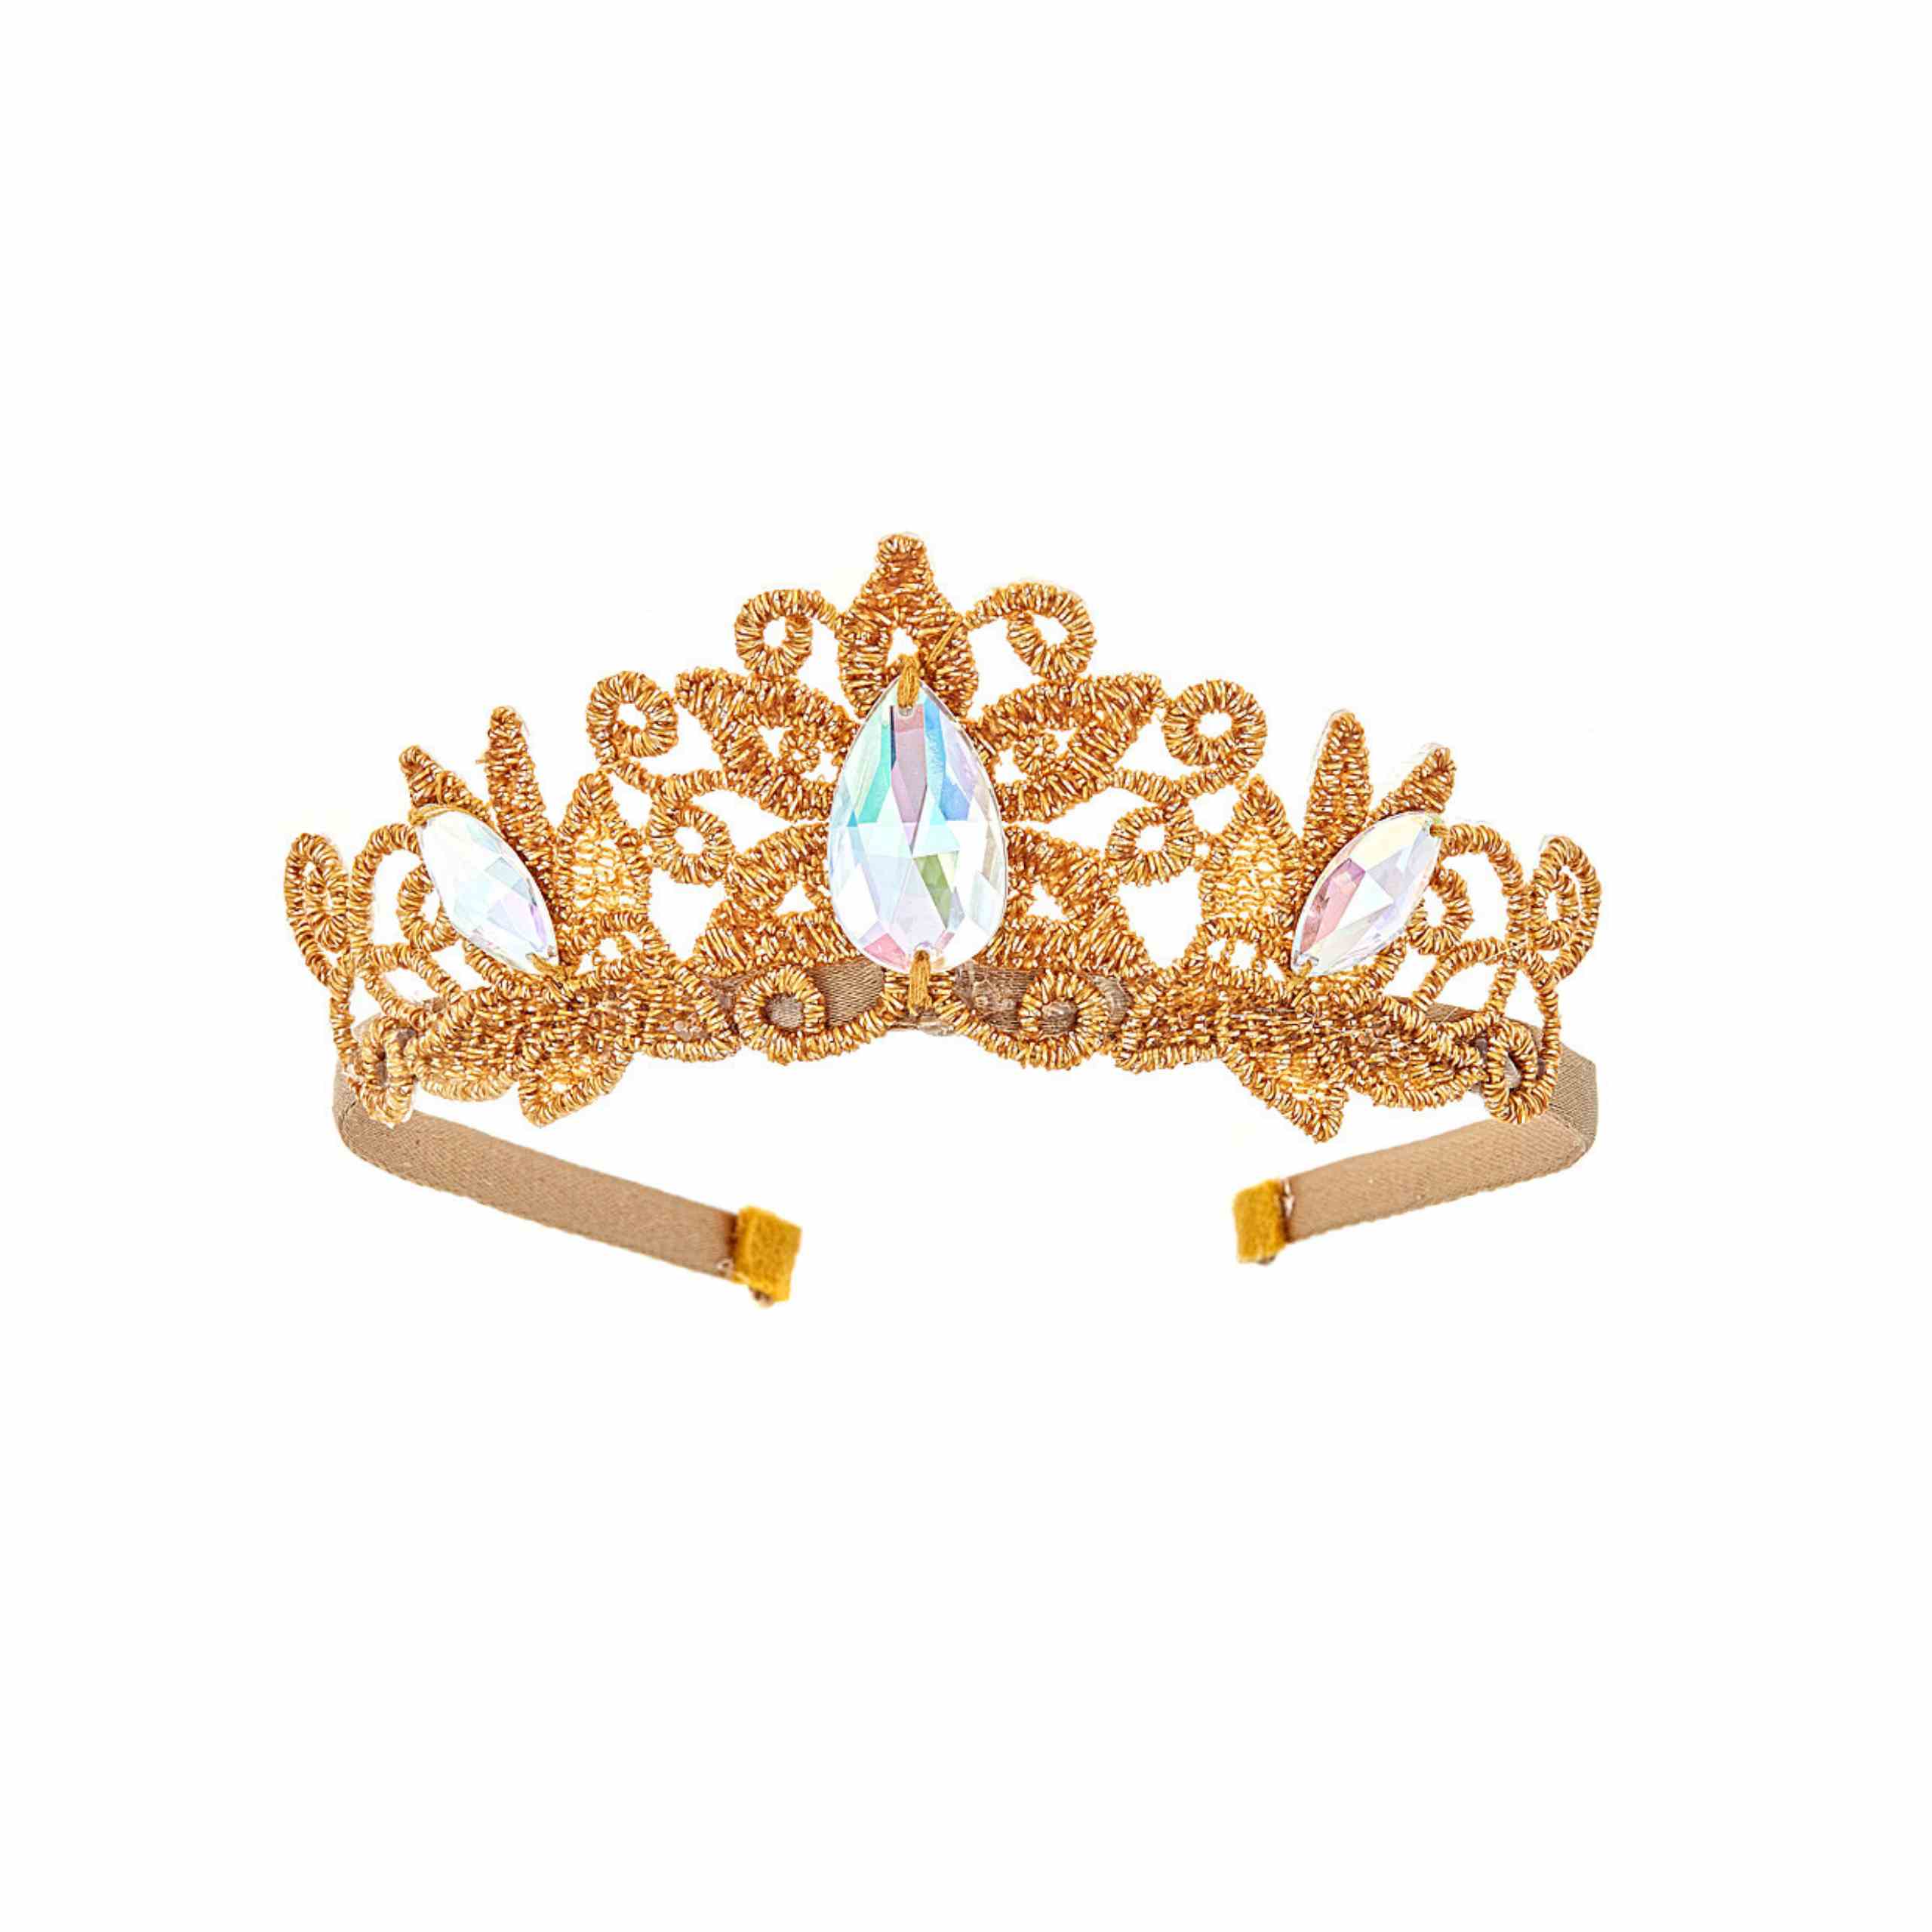 Chloe Princess Crown - Special Offer